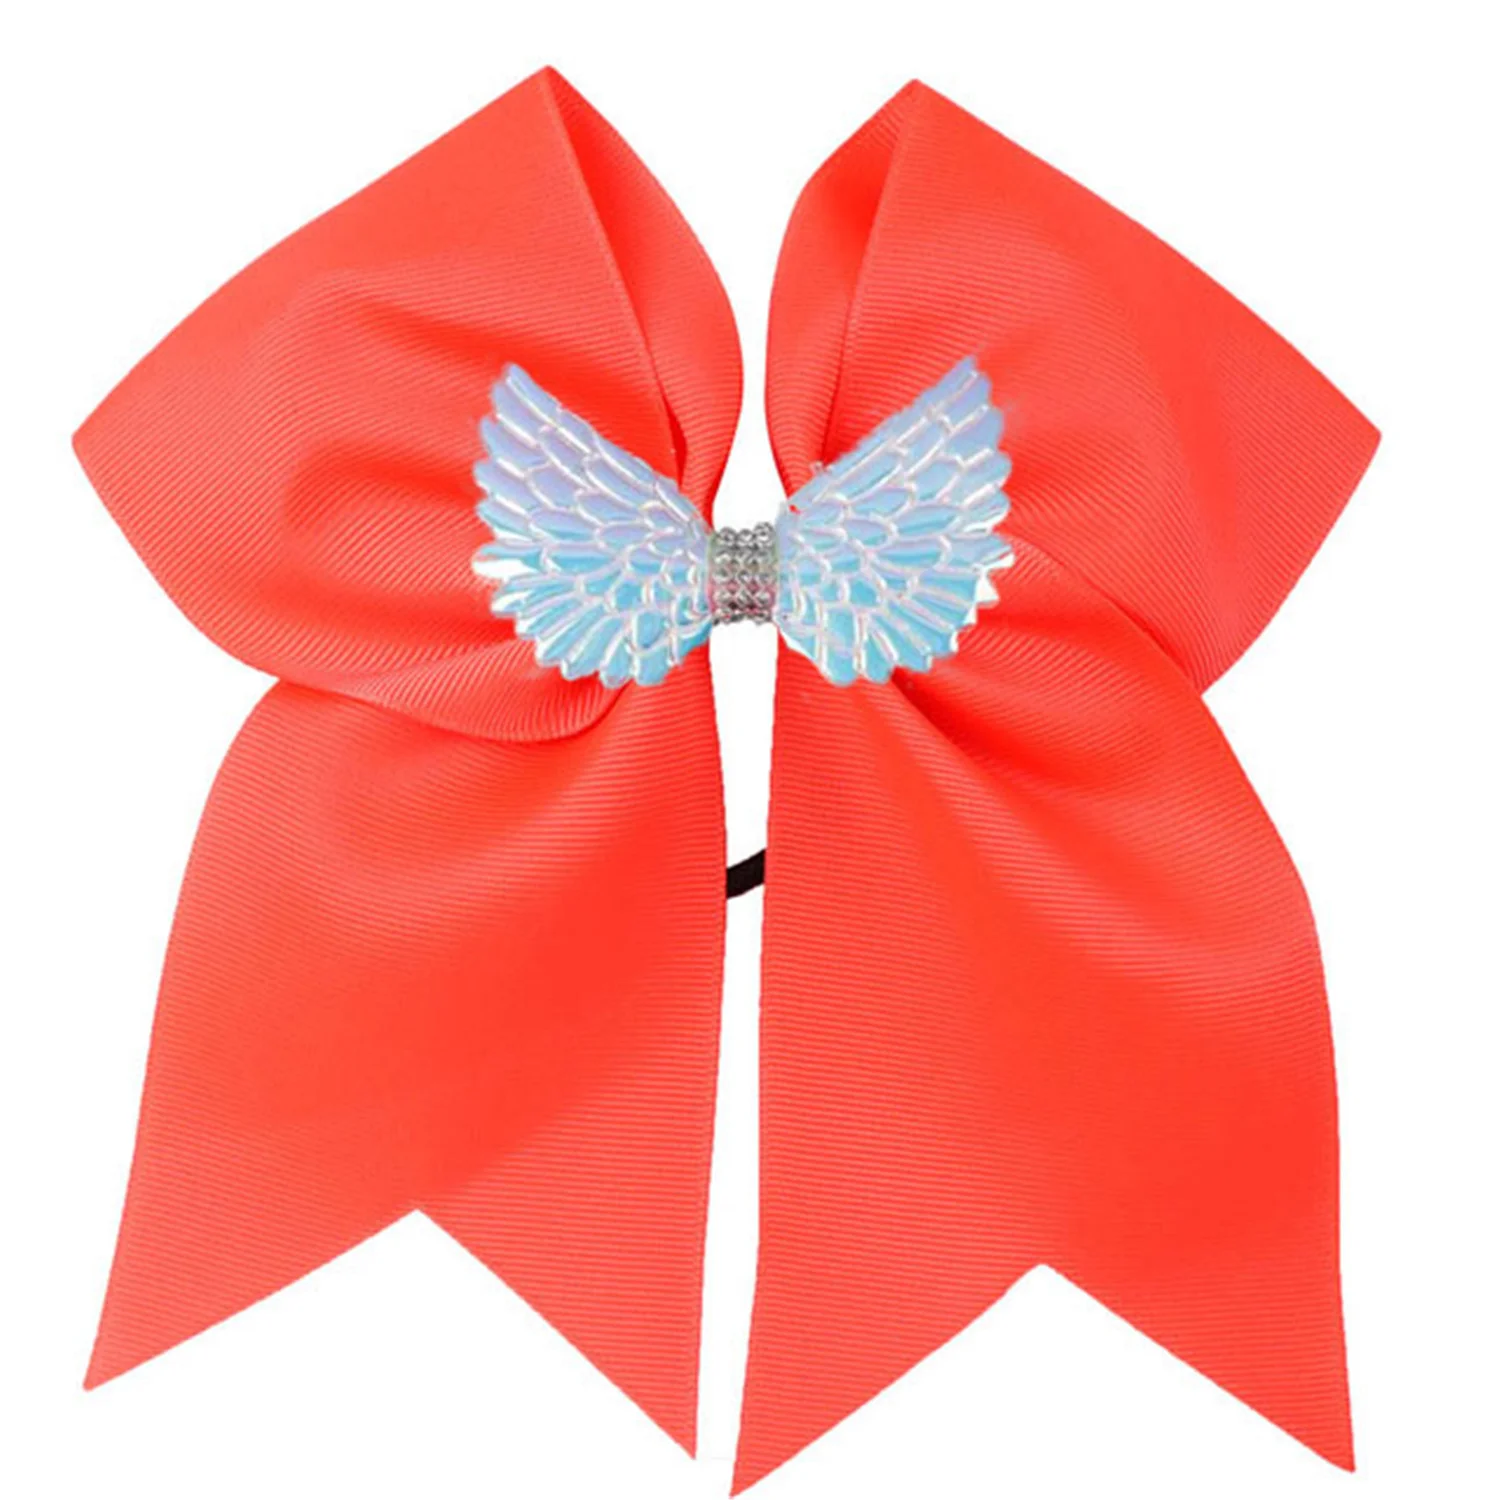 NEW 2pcs/ 7inch angel wings Hair Bow Girls Solid Cheer Bow With Elastic Band Cheerleader Hair Bands For Kids Hair Accessories new 2pcs independence day july fourth bowknot 7 usa flag cheer bows elastic for kids children hair bow girls hair accessories